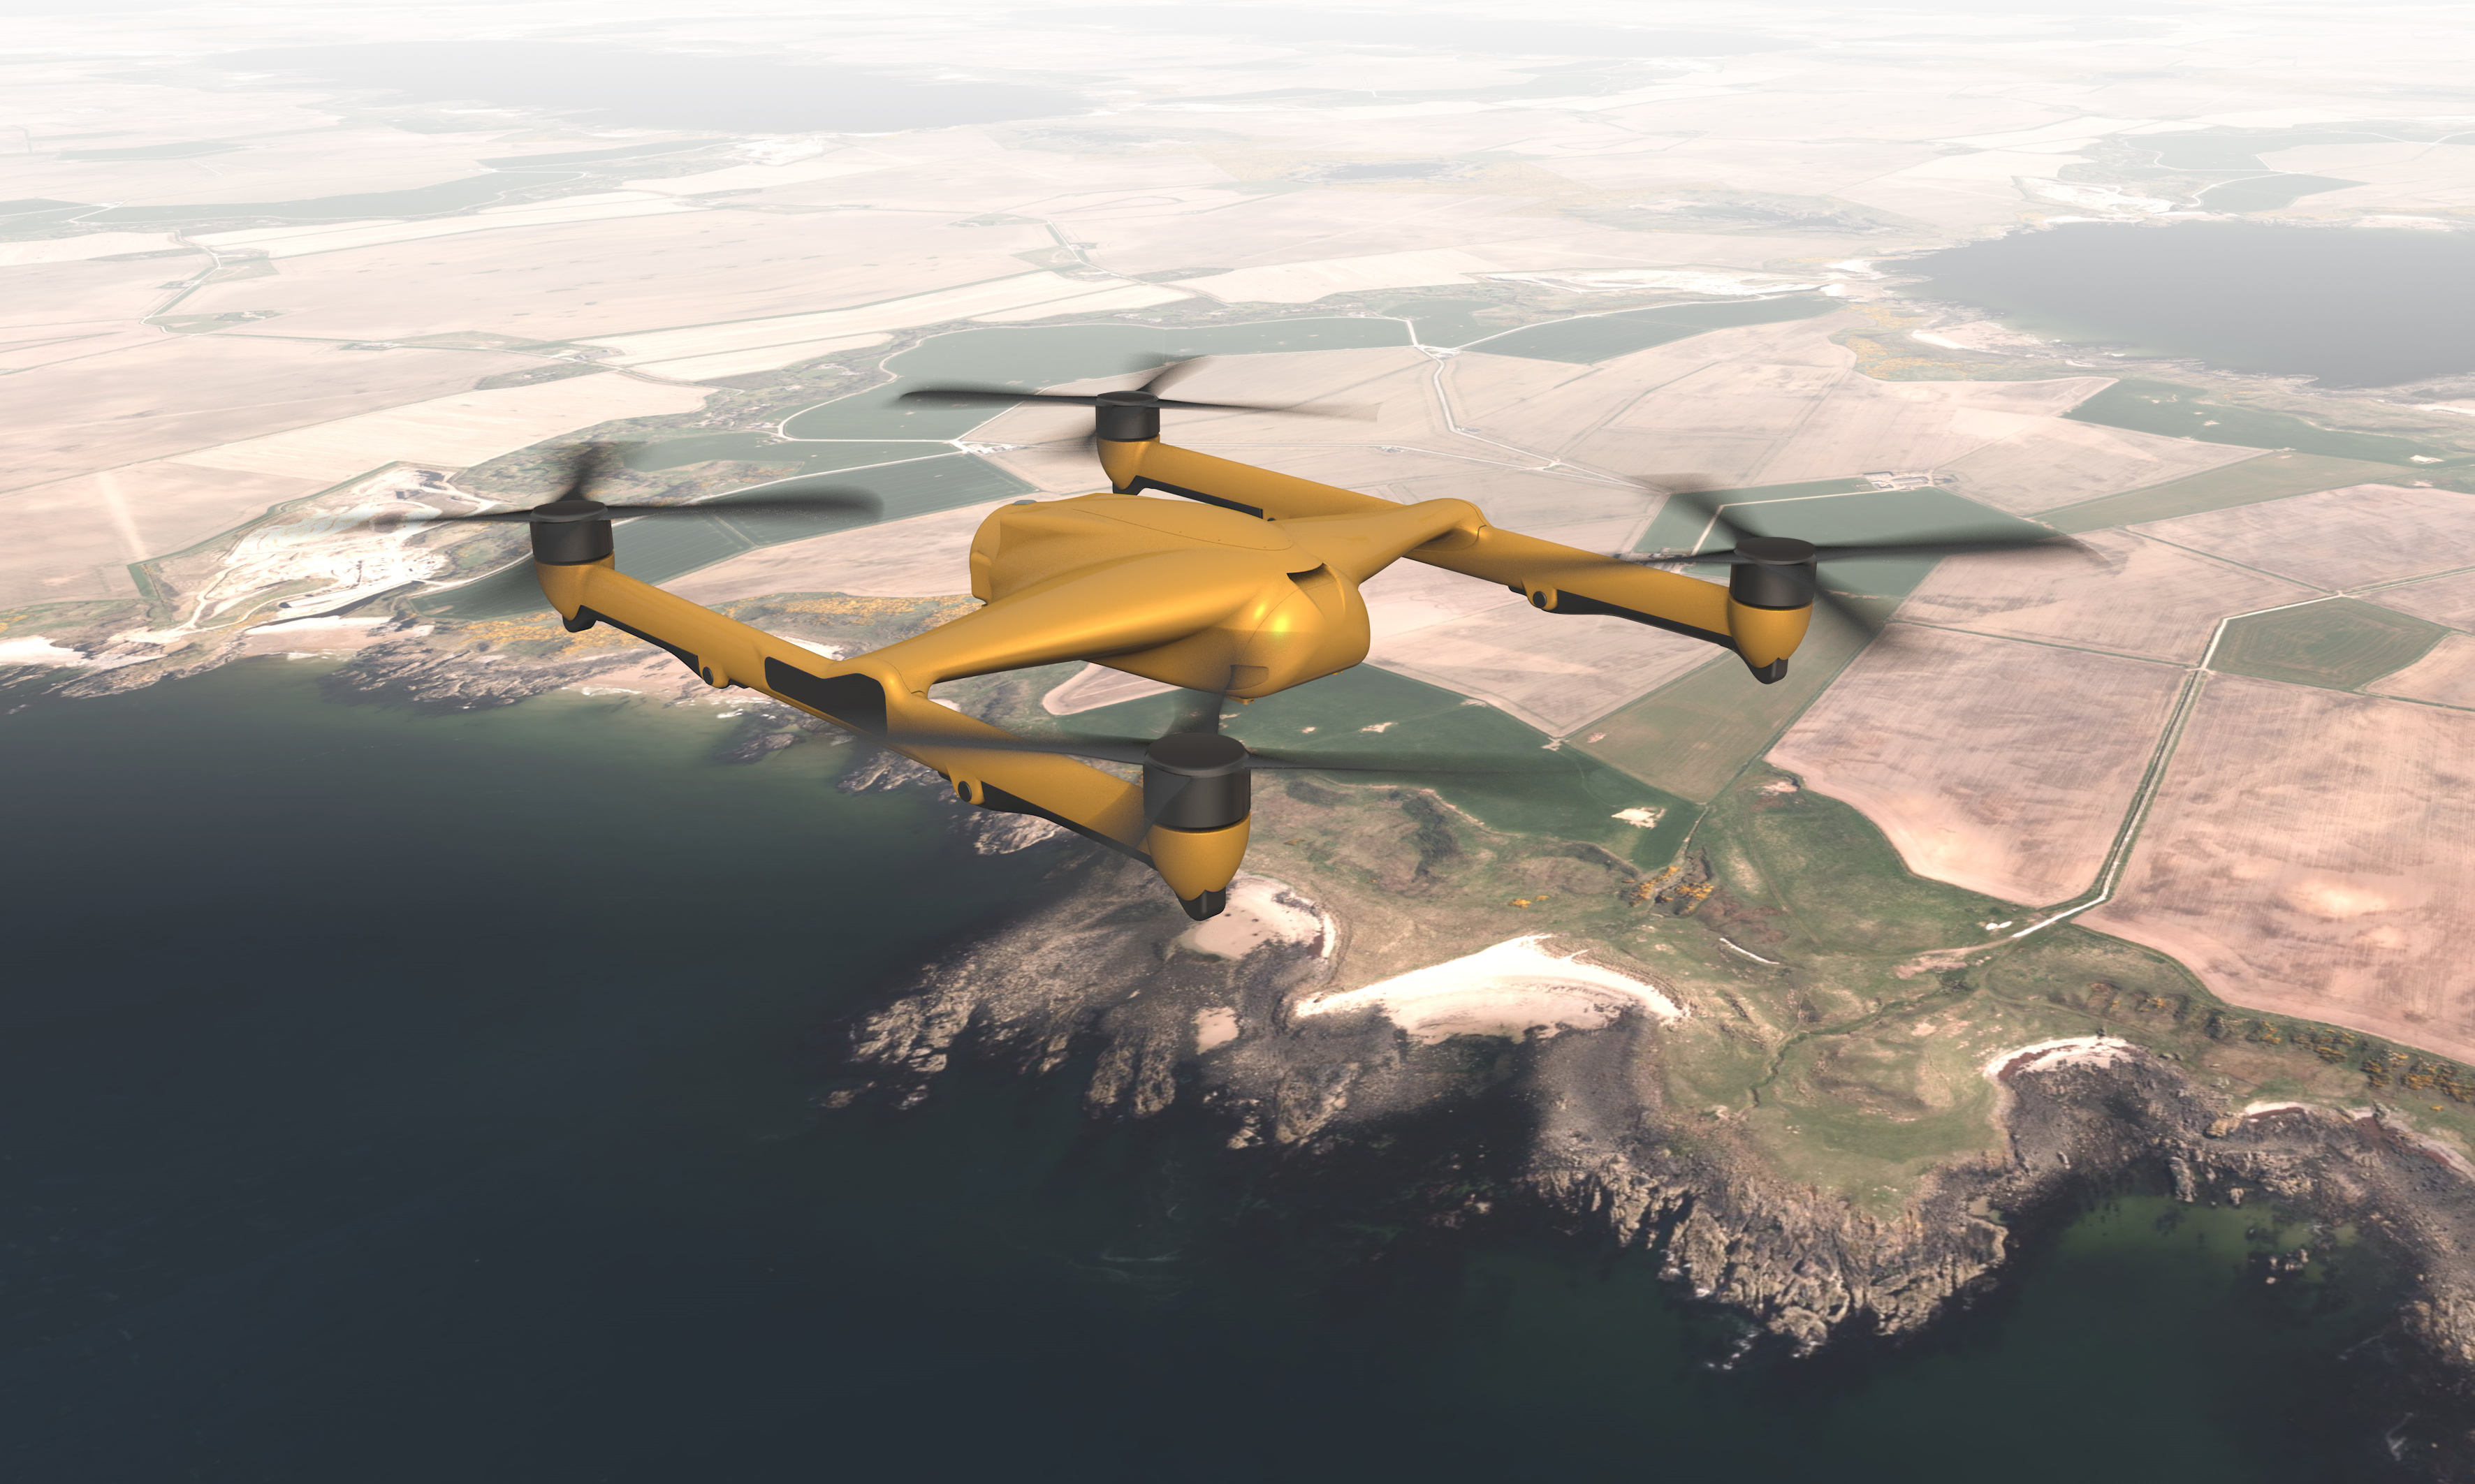 Cargo drones: A potential gamechanger in the logistics industry